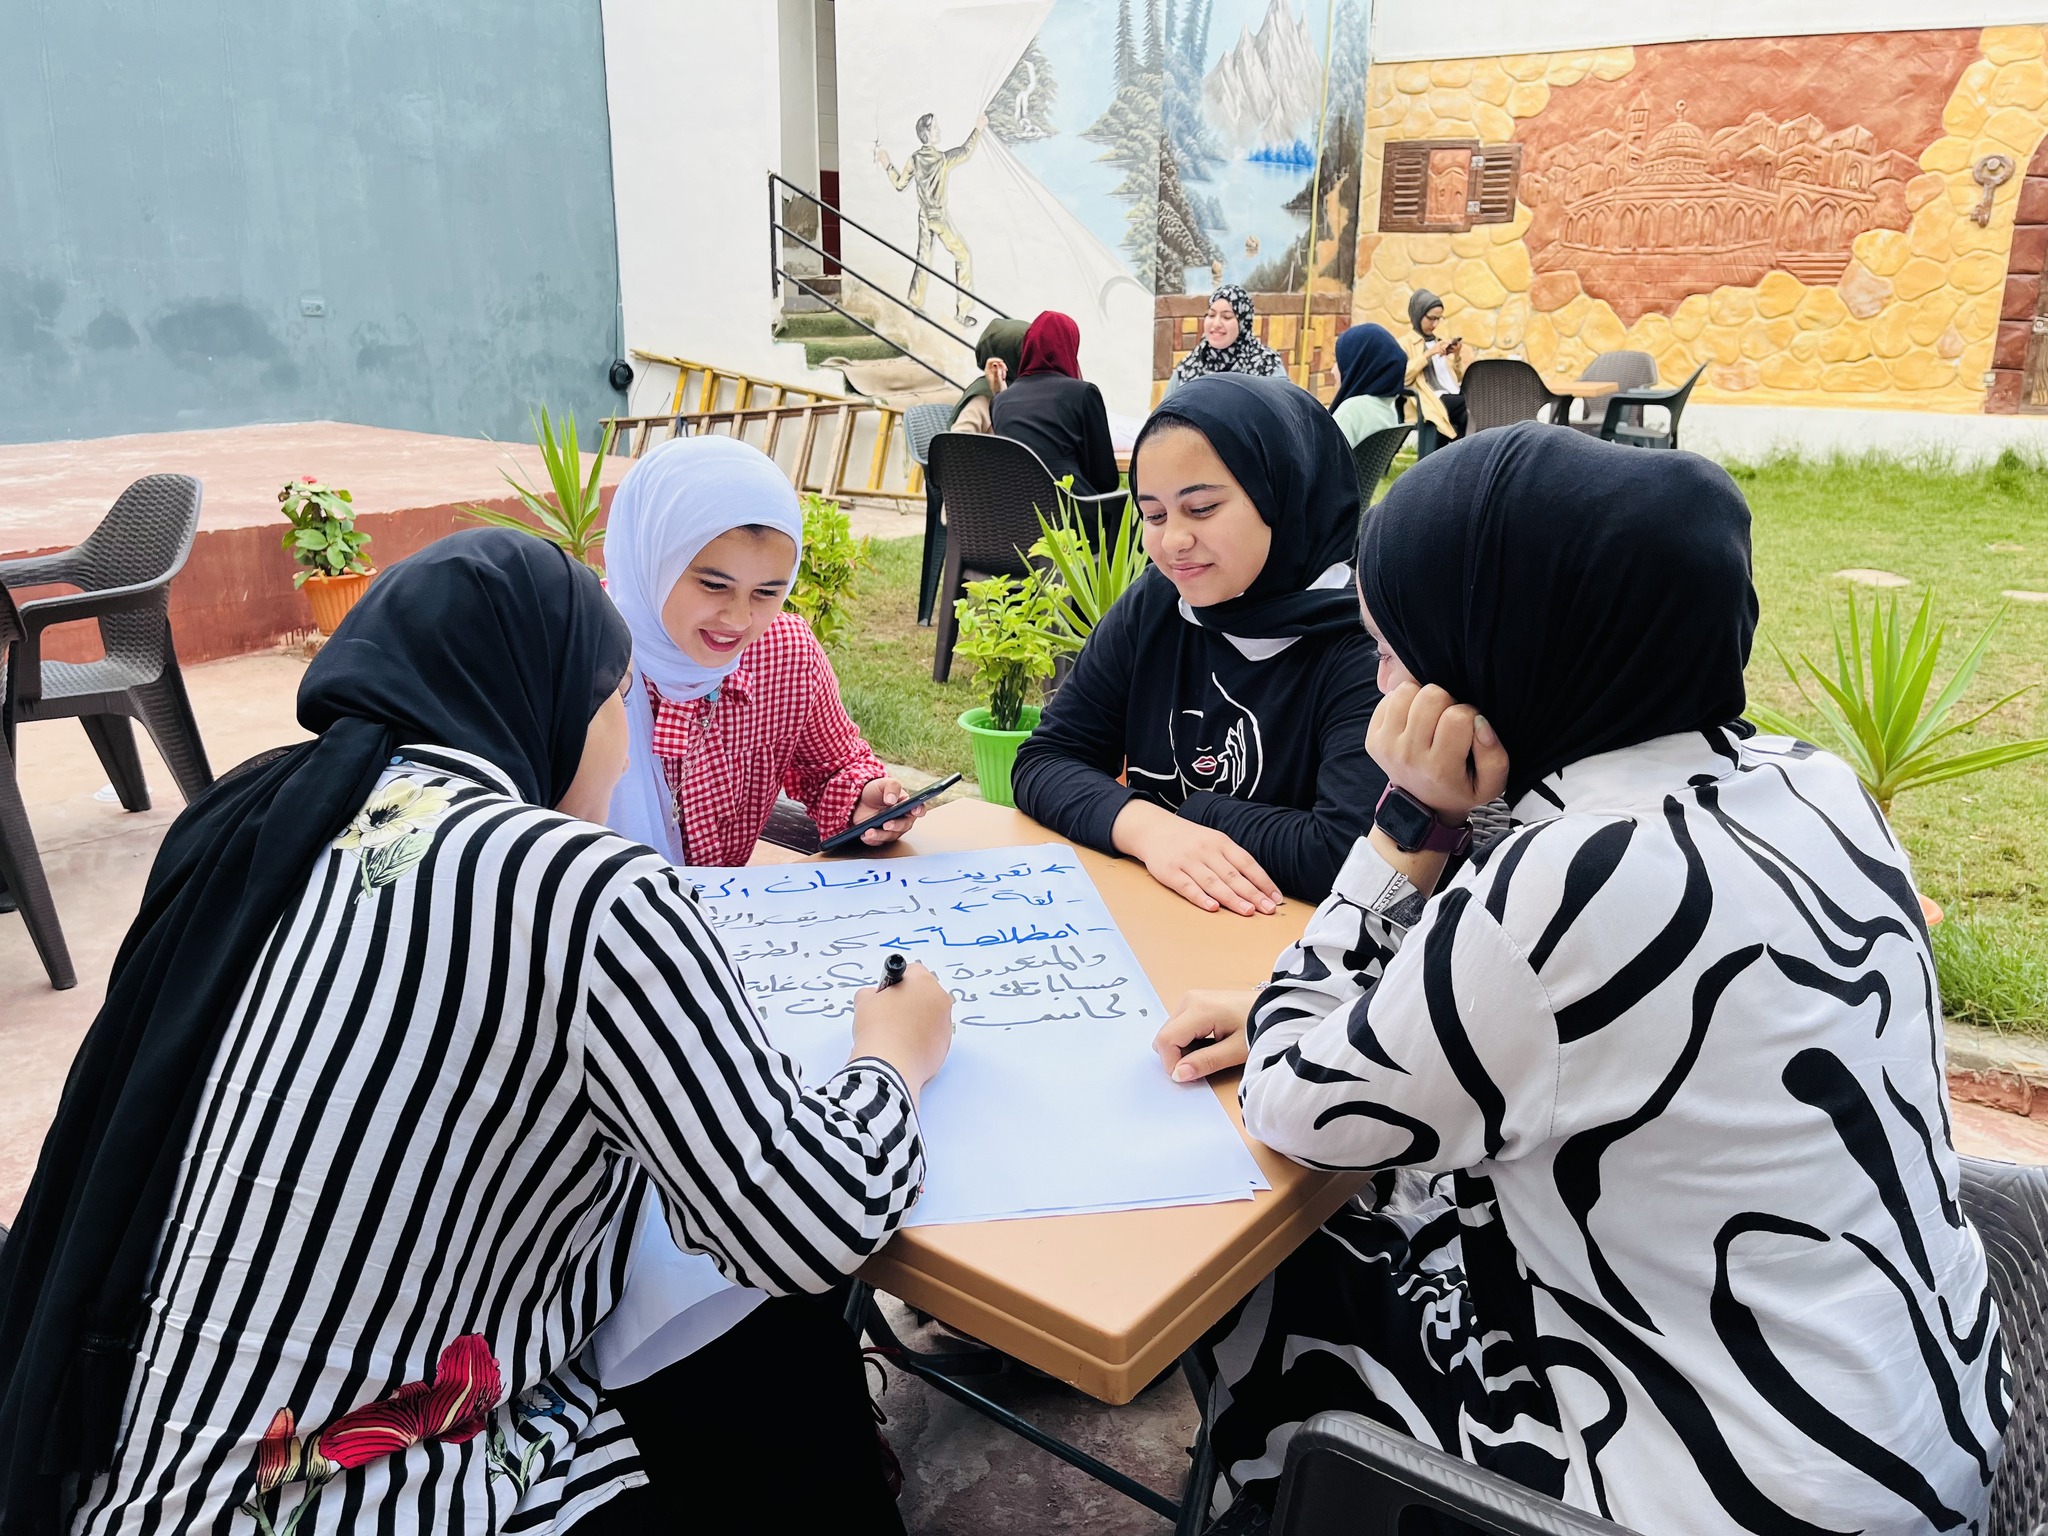 photo of 4 girls around a table writing on a flipchart